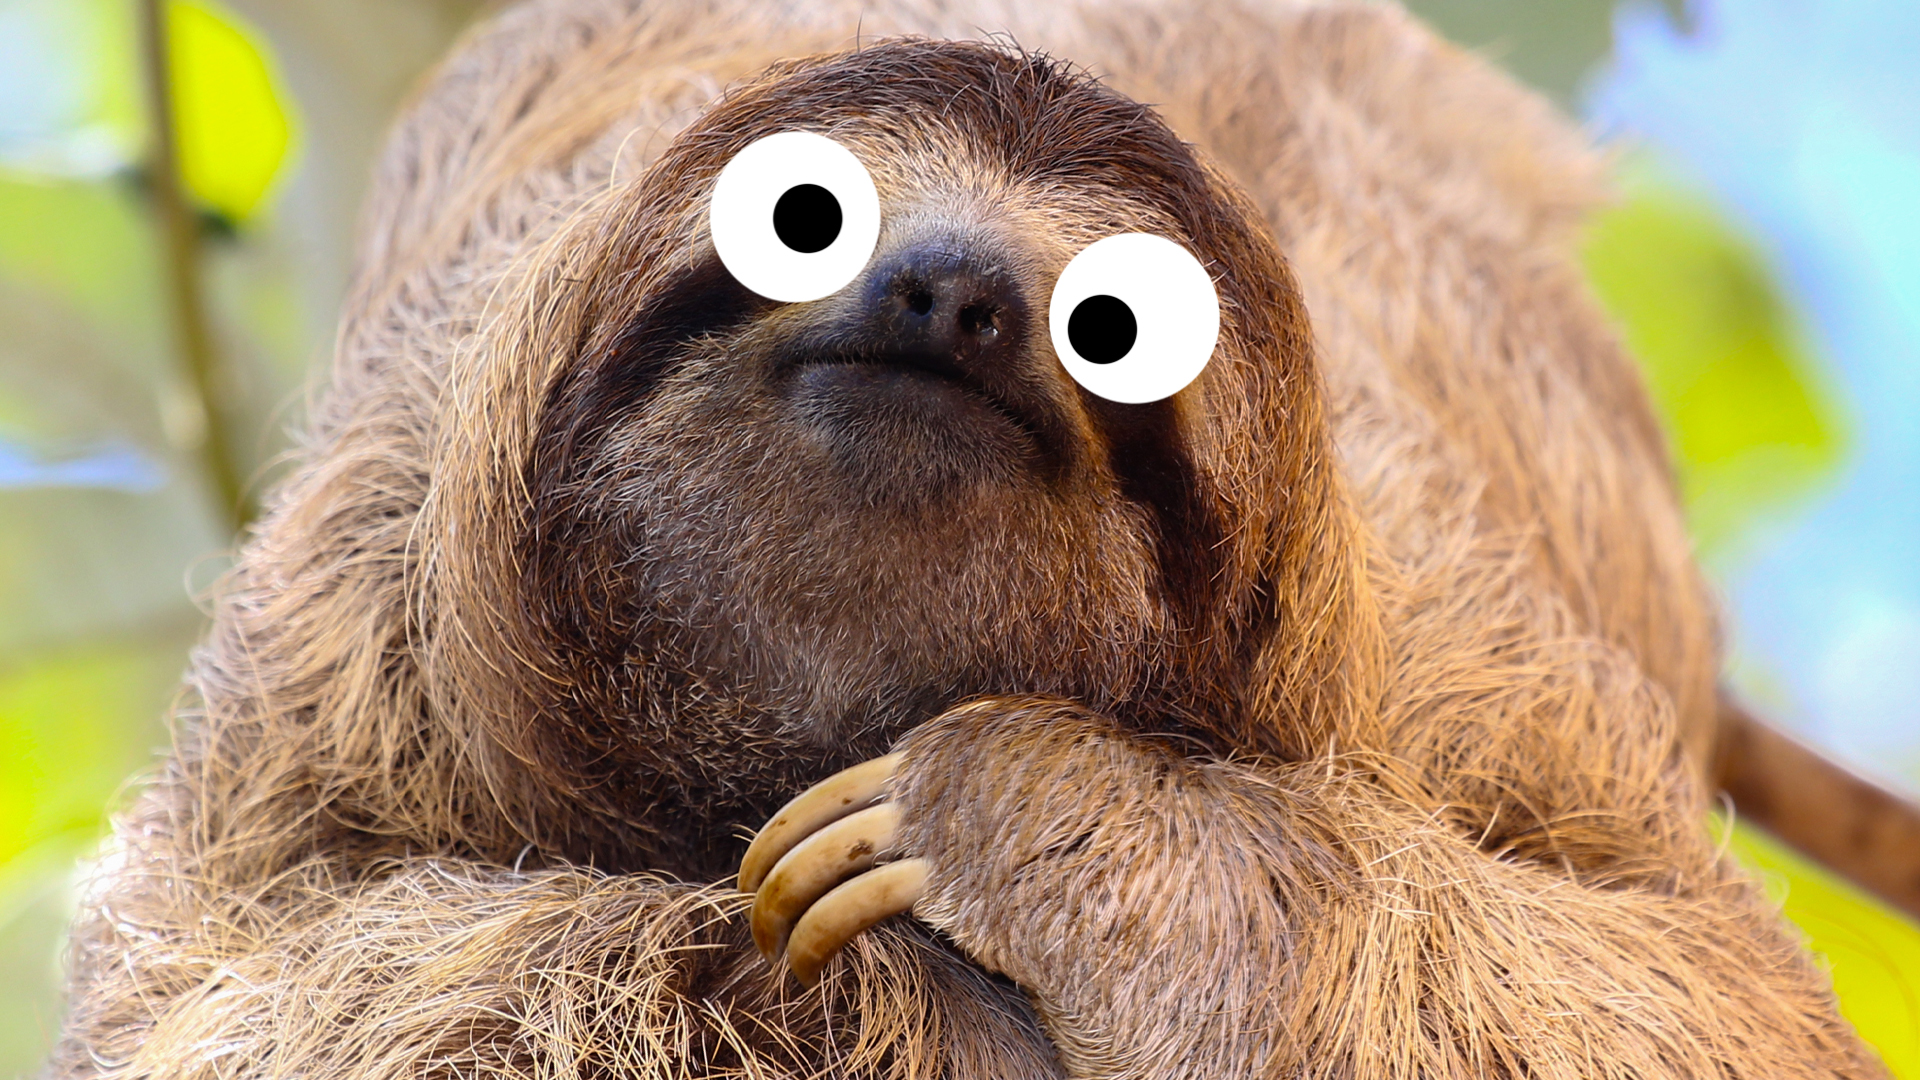 A sloth relaxing